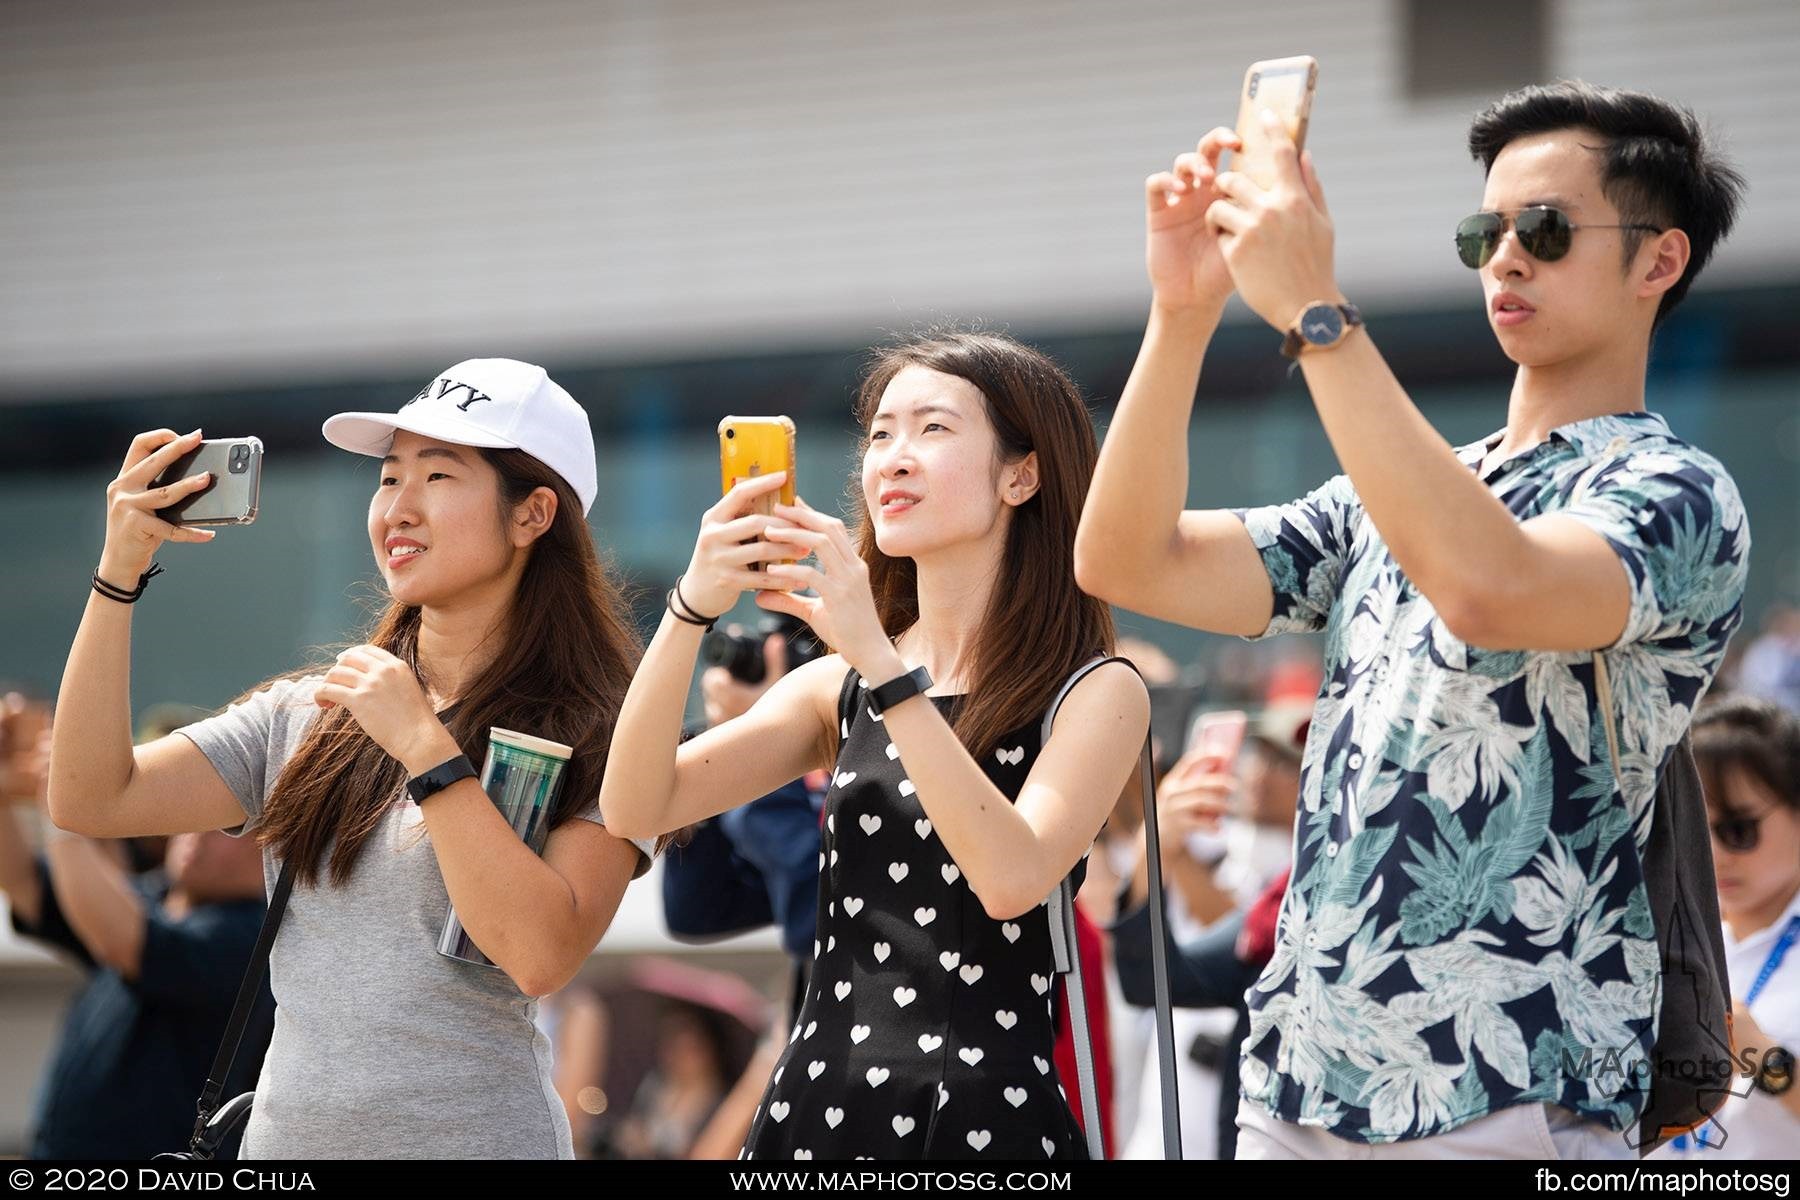 Spectators recording the aerial display on their mobile phones